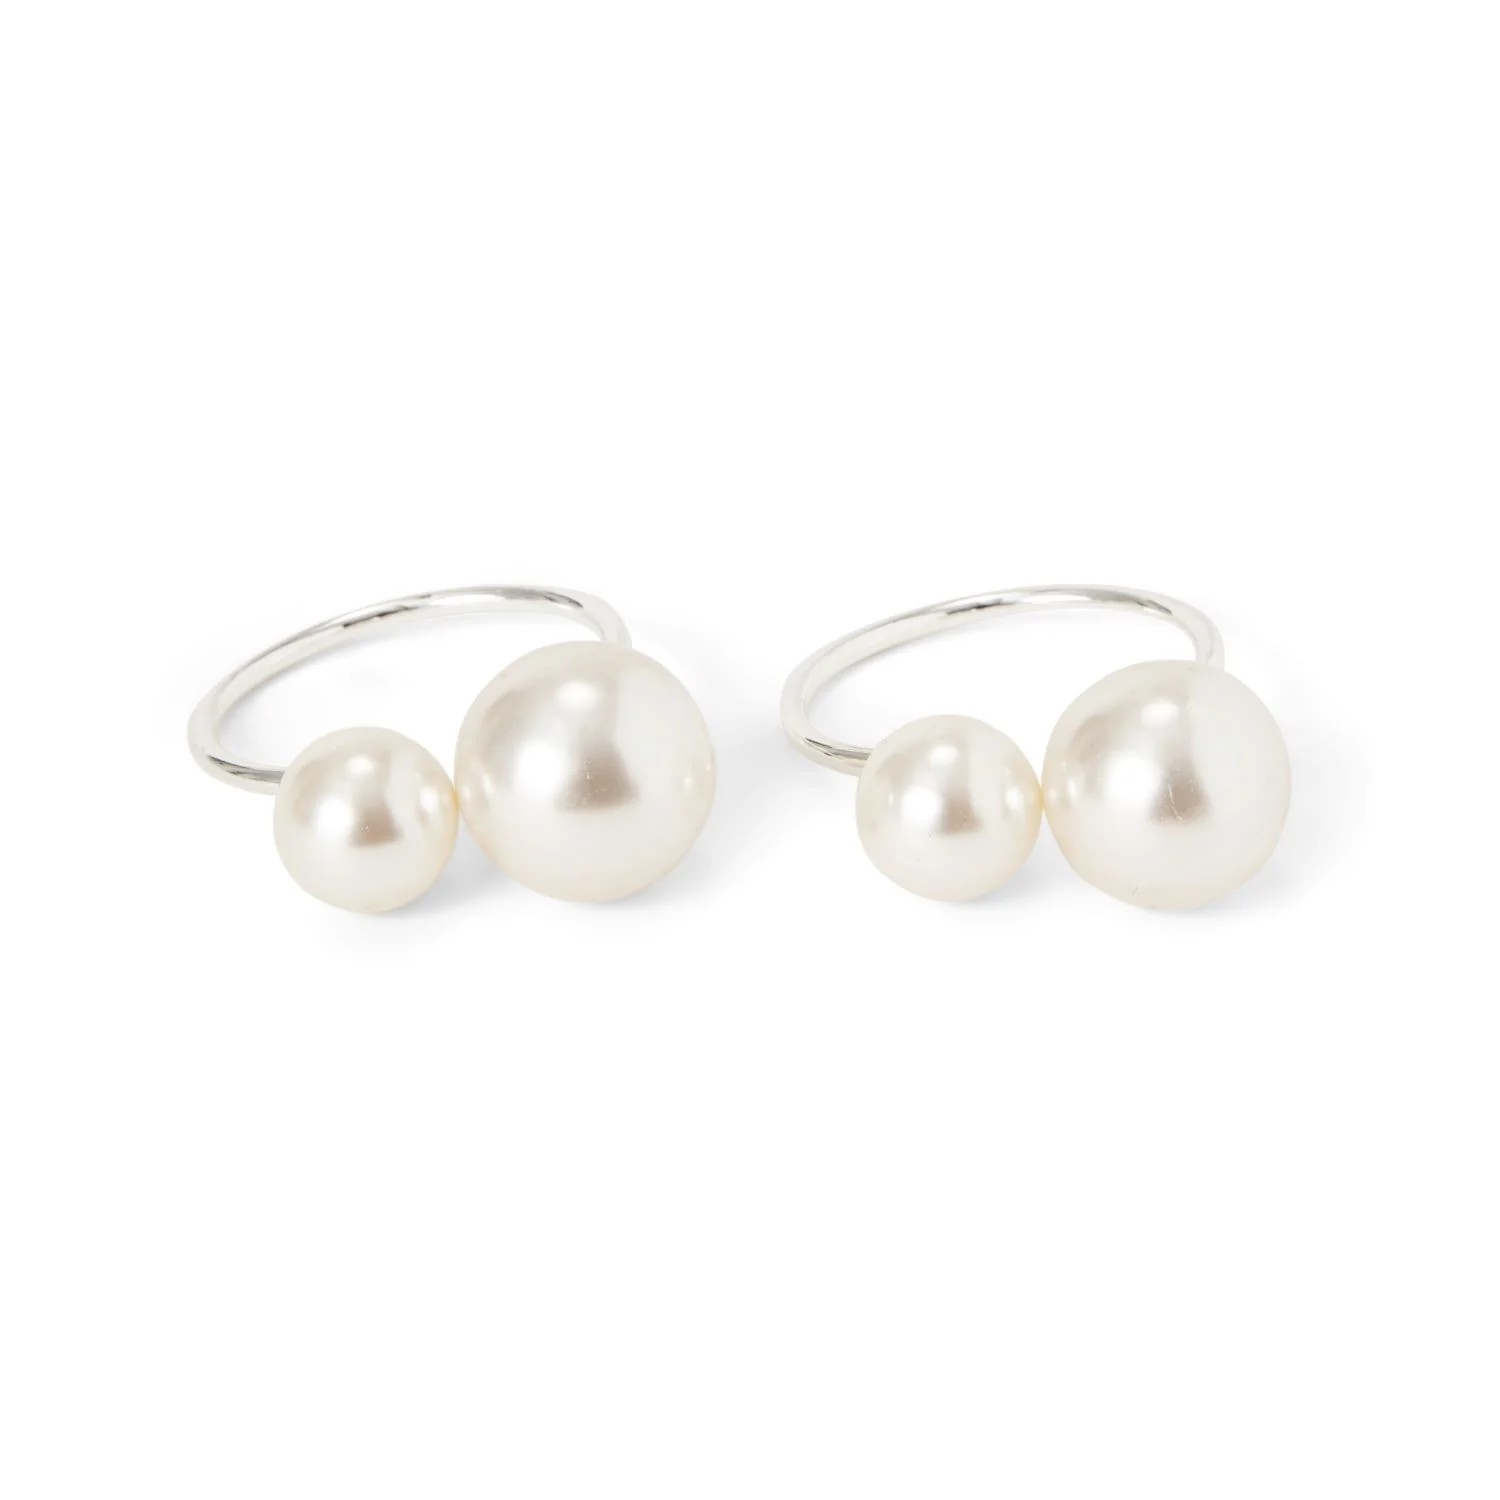 Napkin Ring Double Pearl